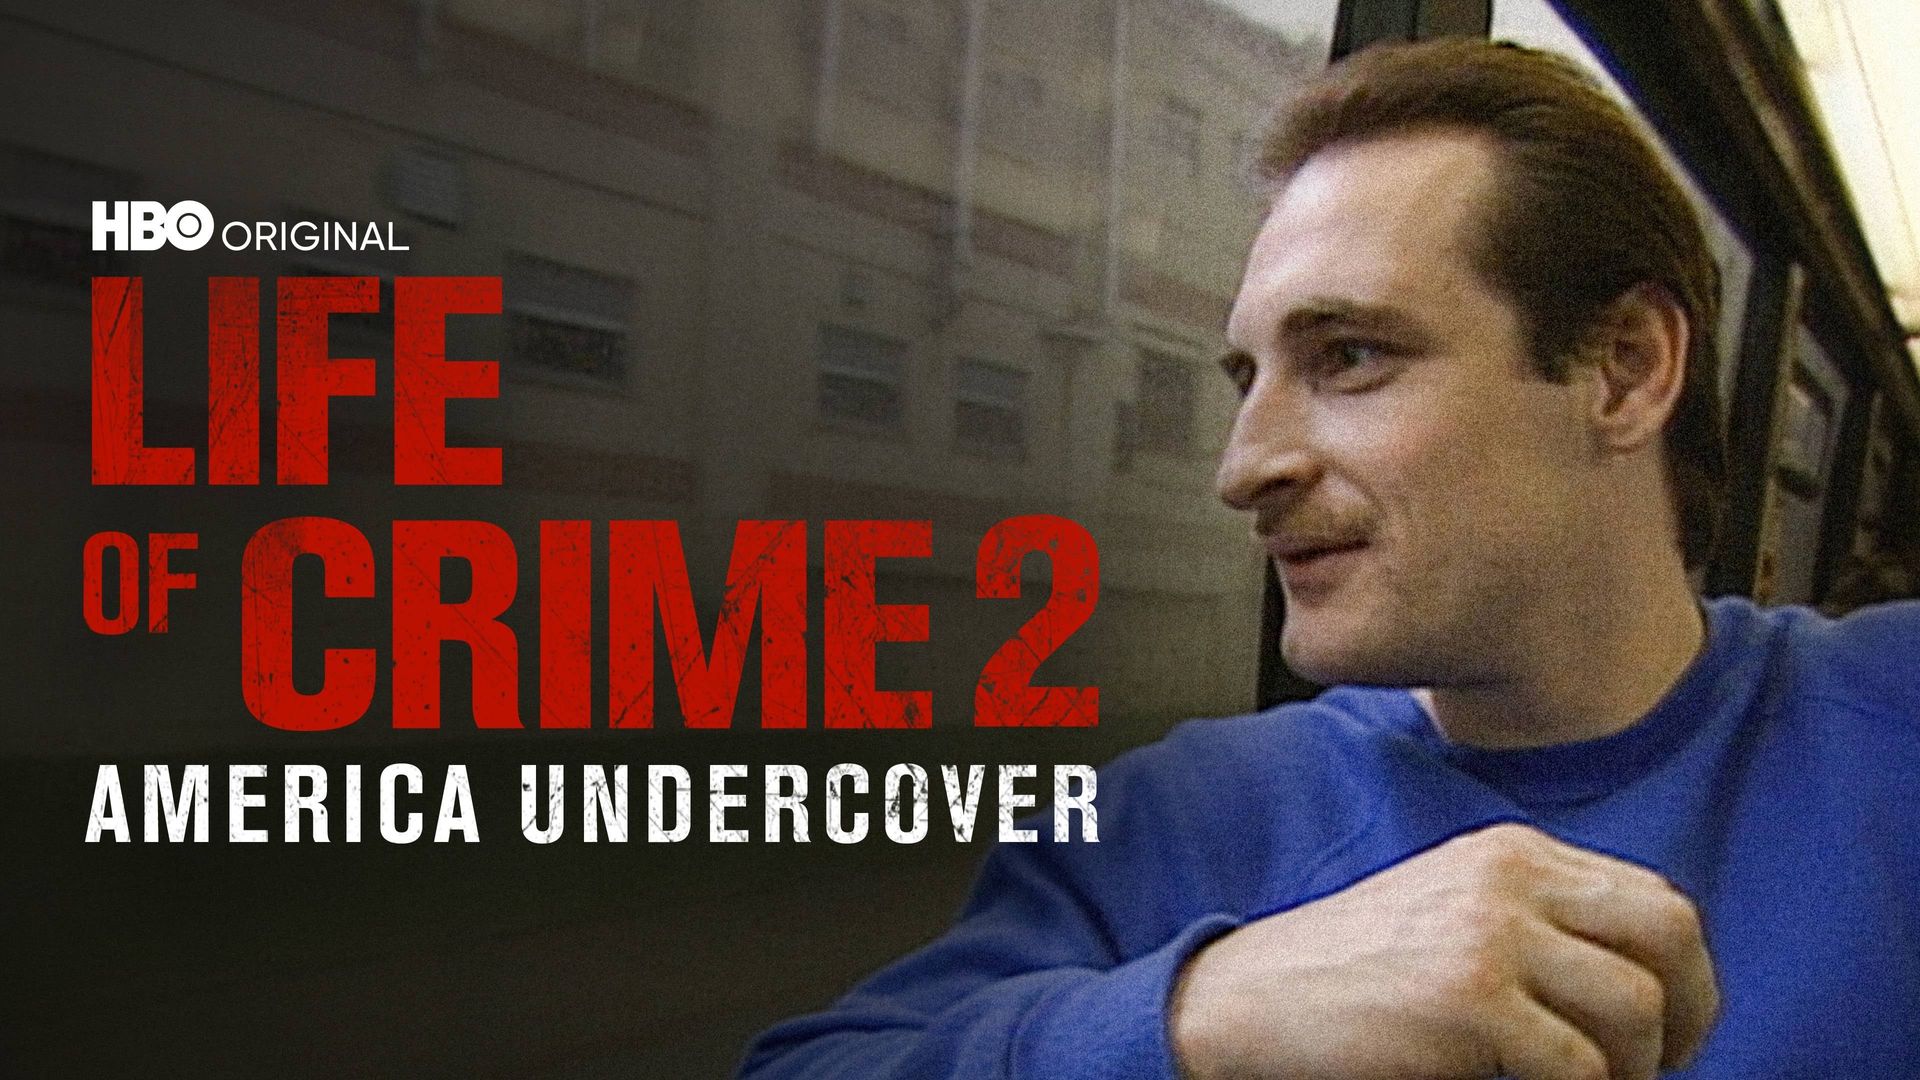 Life of Crime 2 background